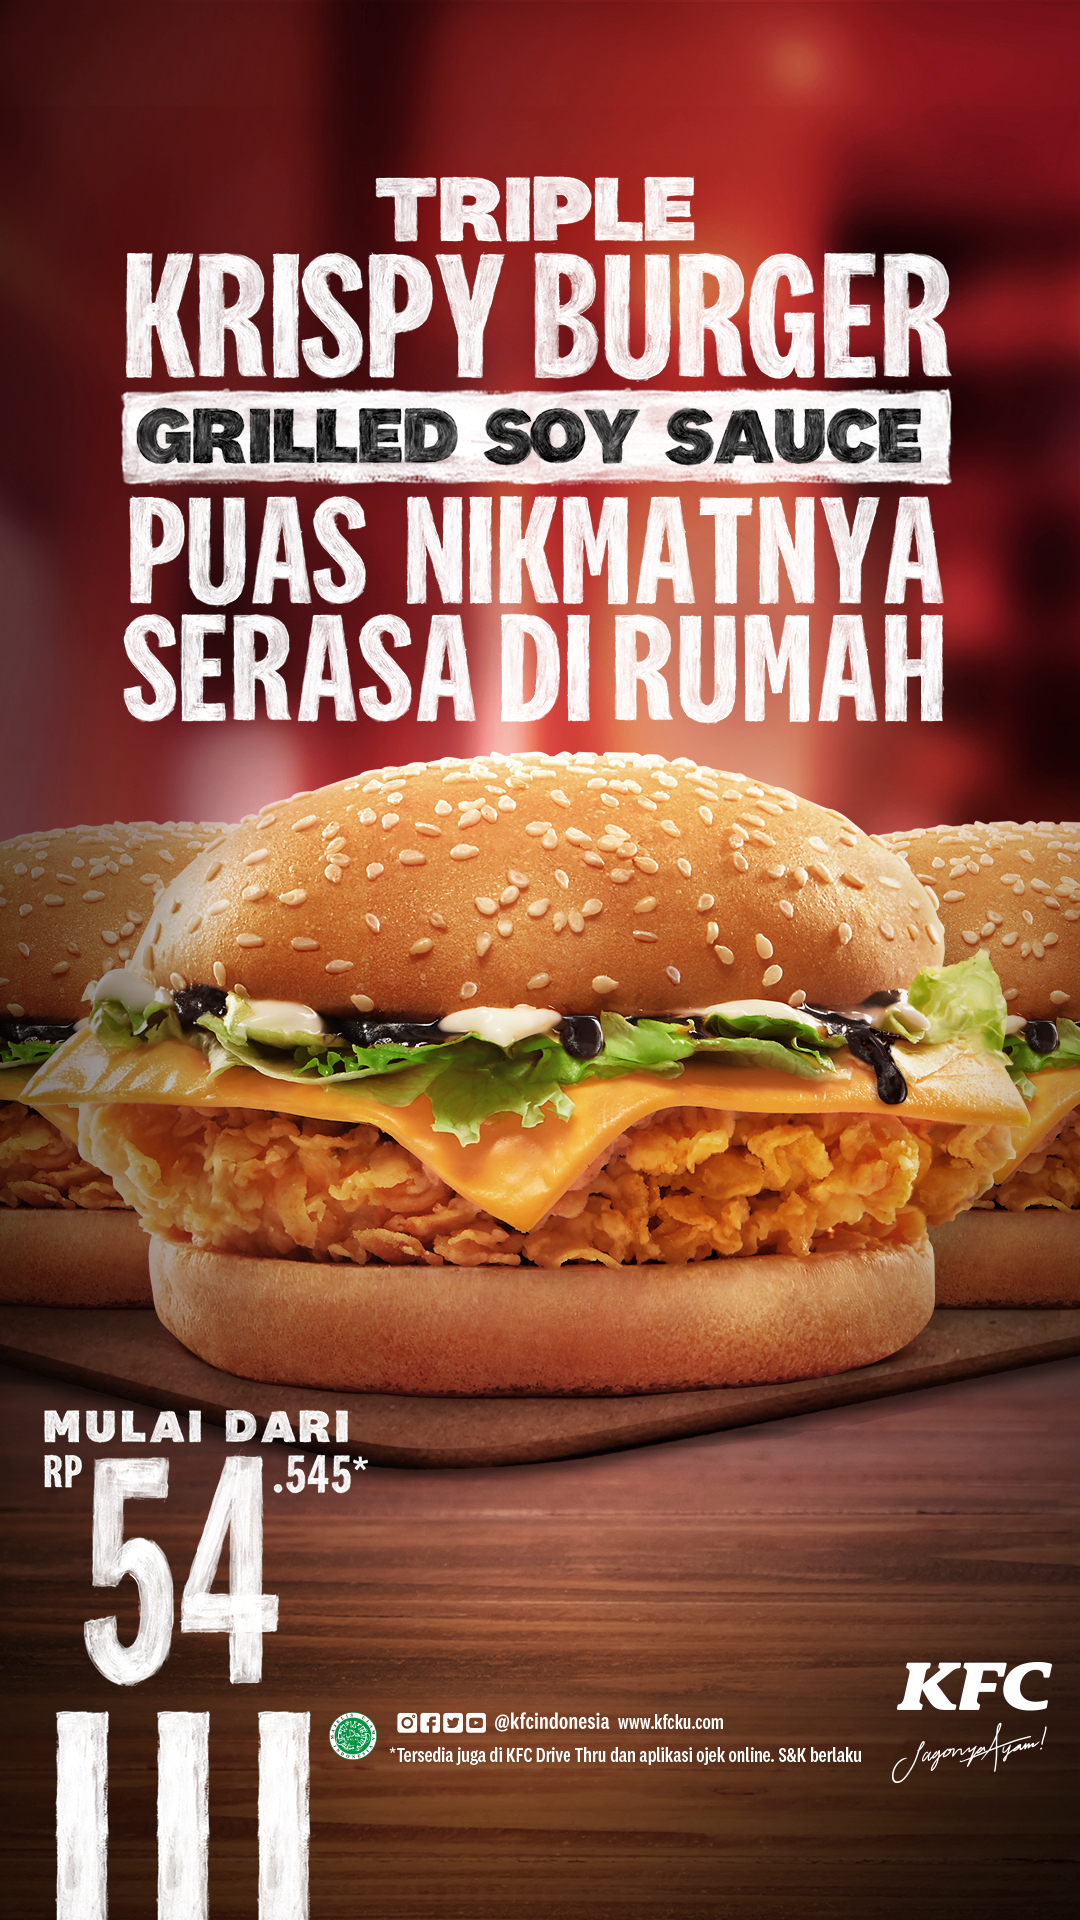 KFC KRIPSY BURGER GRILLED SOY SAUCE